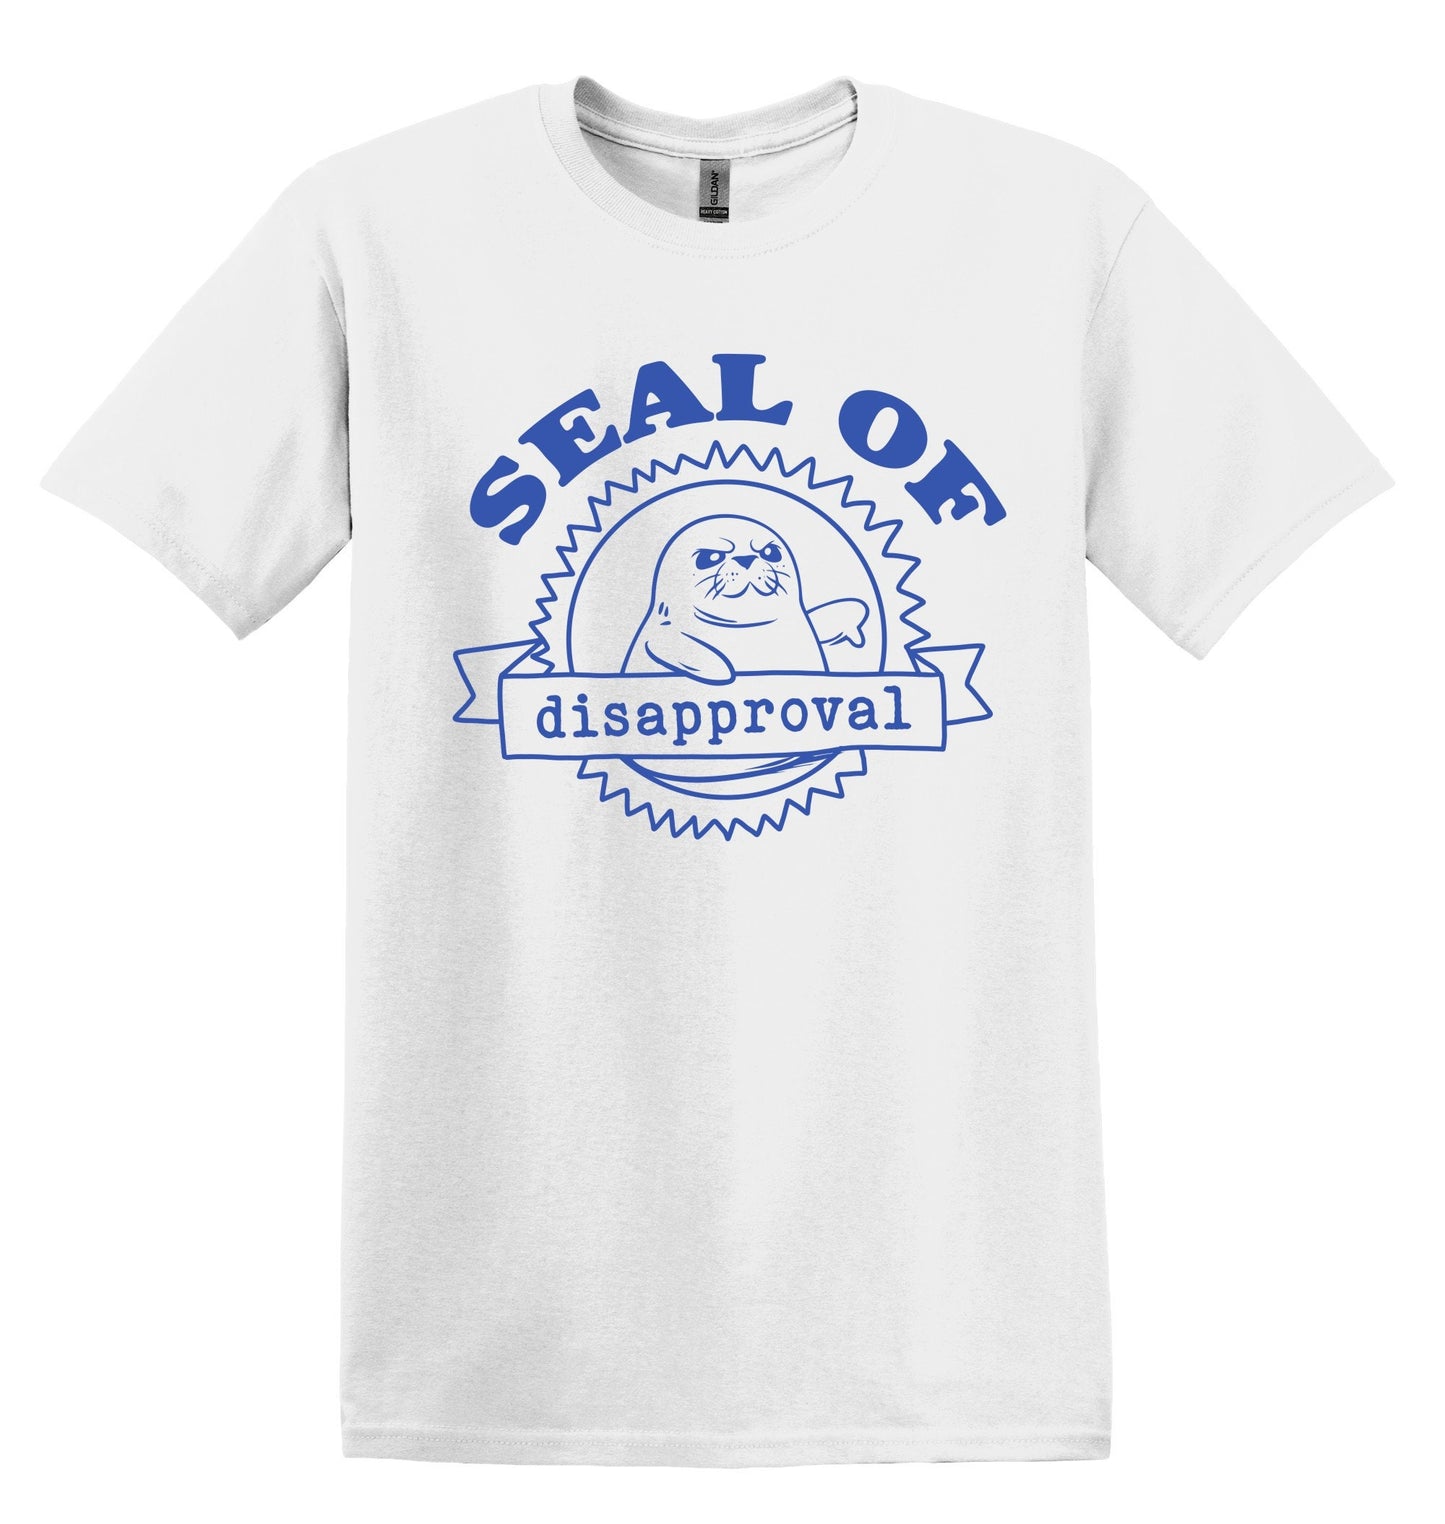 Seal of Disapproval Shirt - Funny Graphic Tee